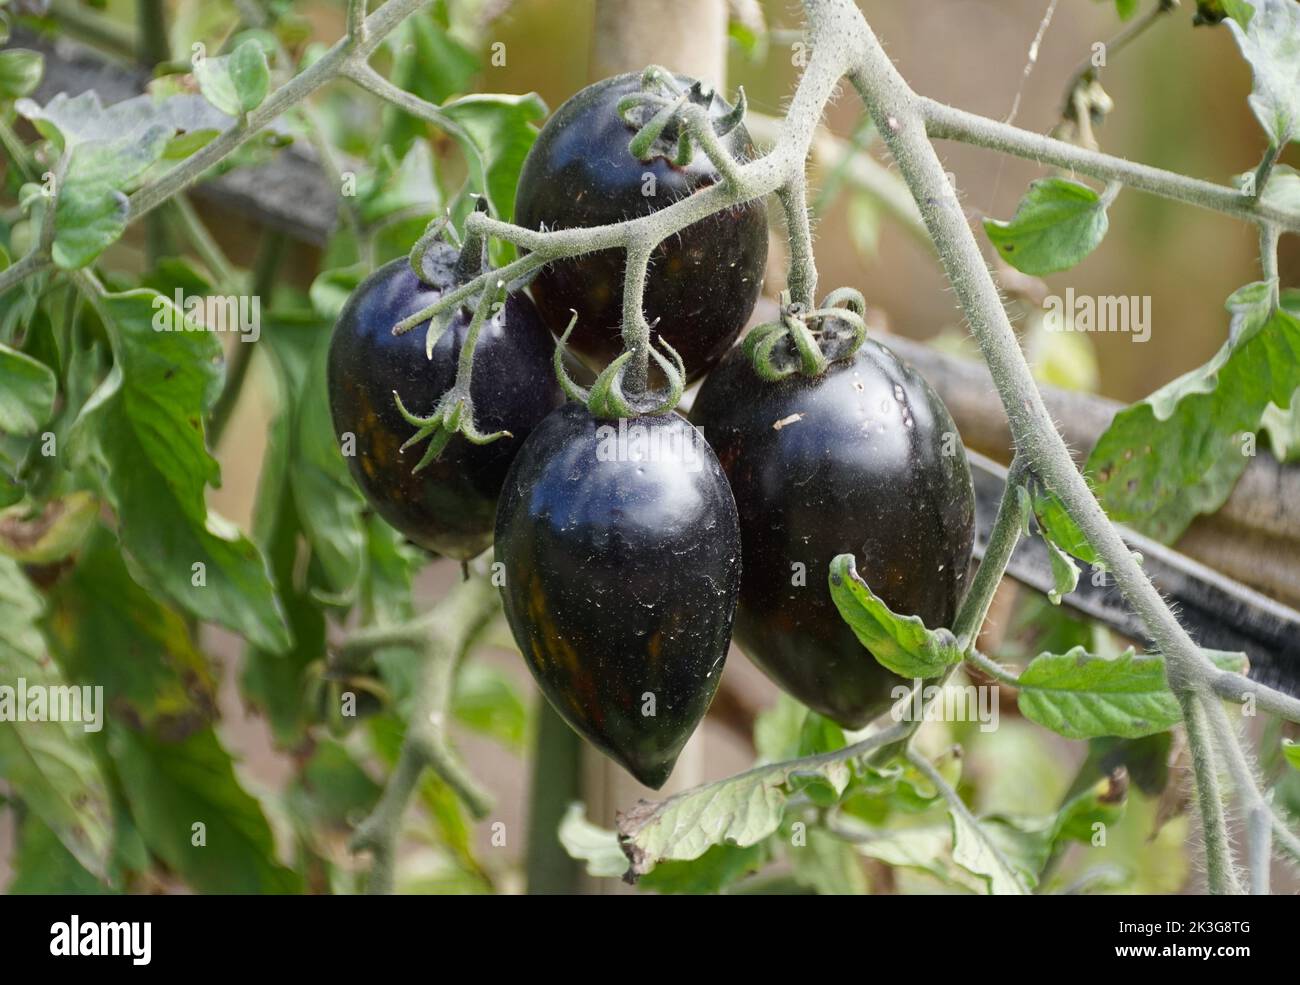 Close up of the dark color of Midnight Roma tomatoes on the tree Stock Photo